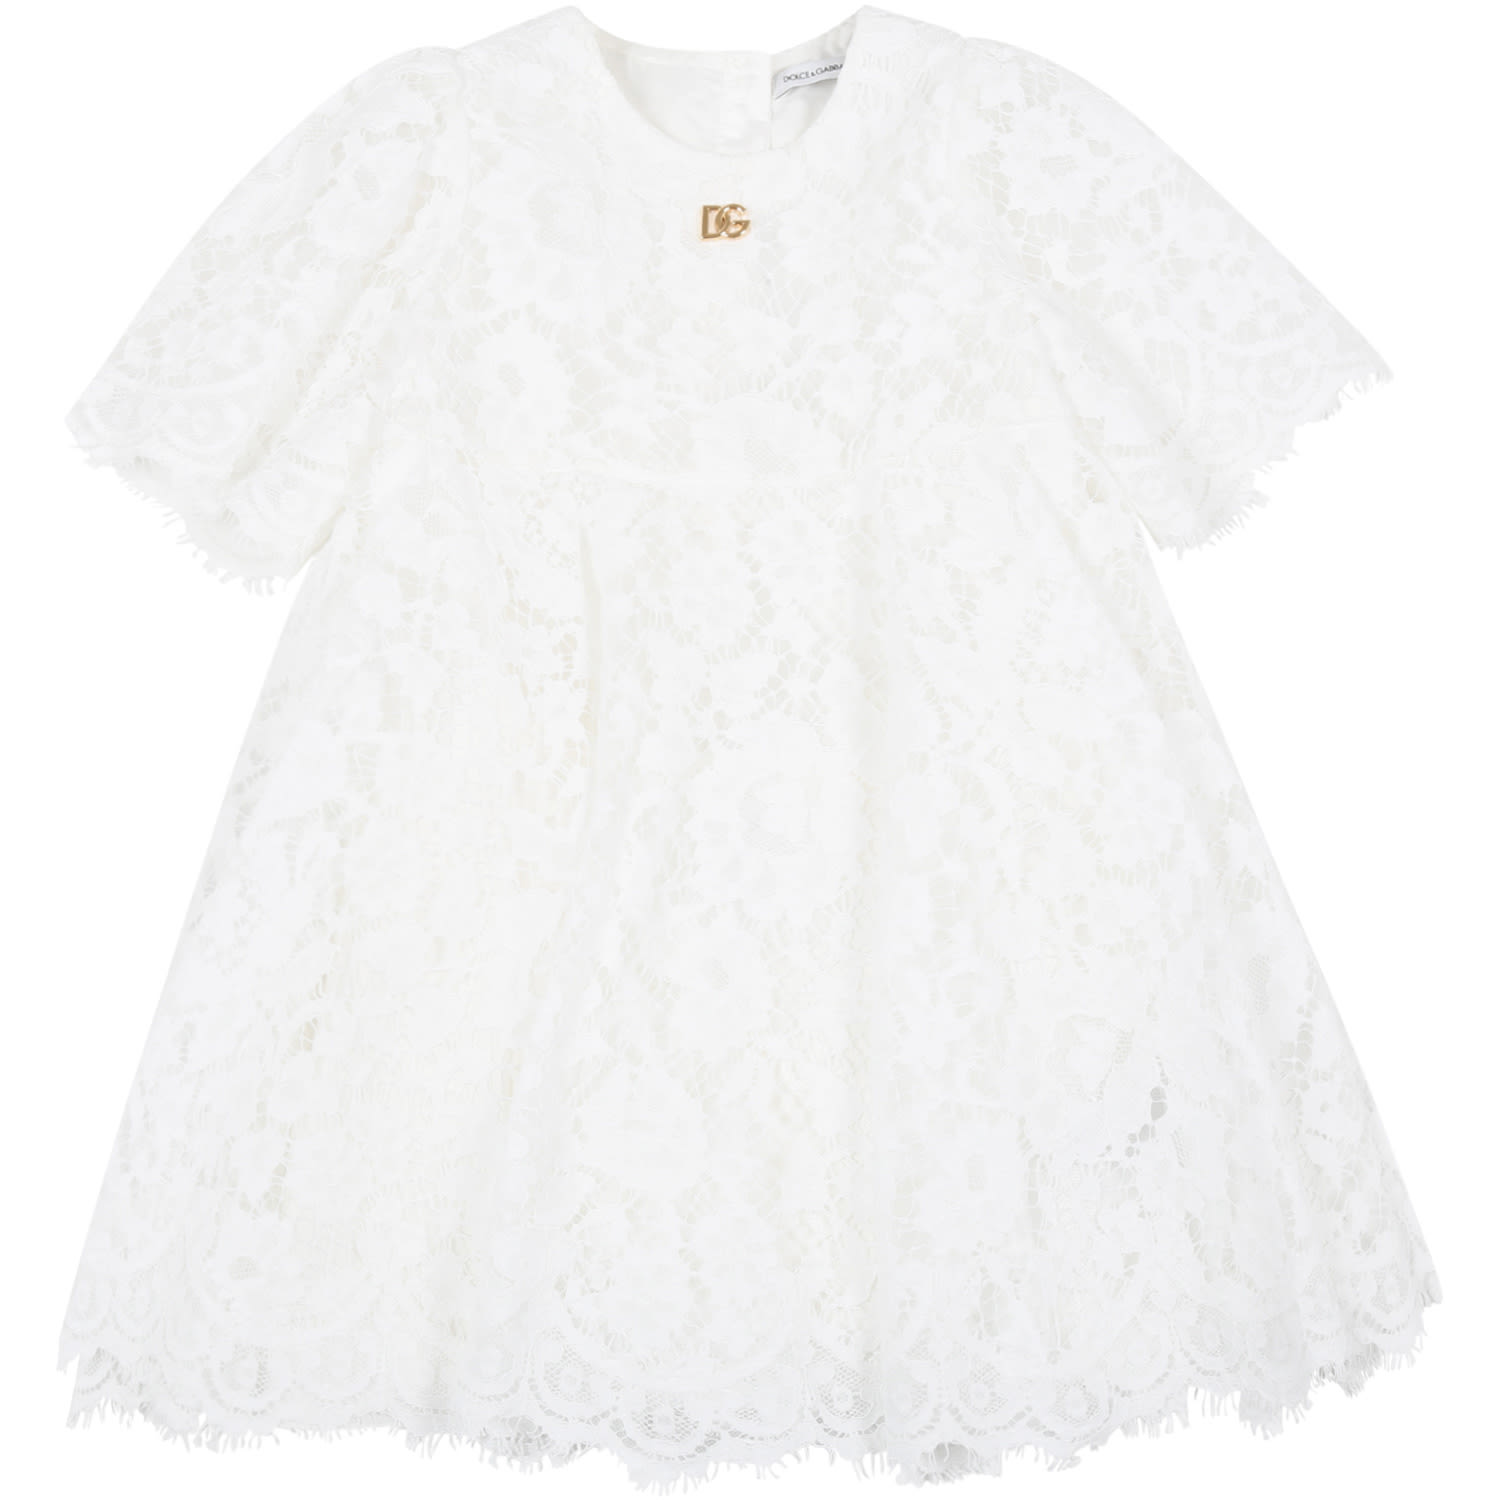 Dolce & Gabbana White Dress For Baby Girl With Metallic Logo Patch